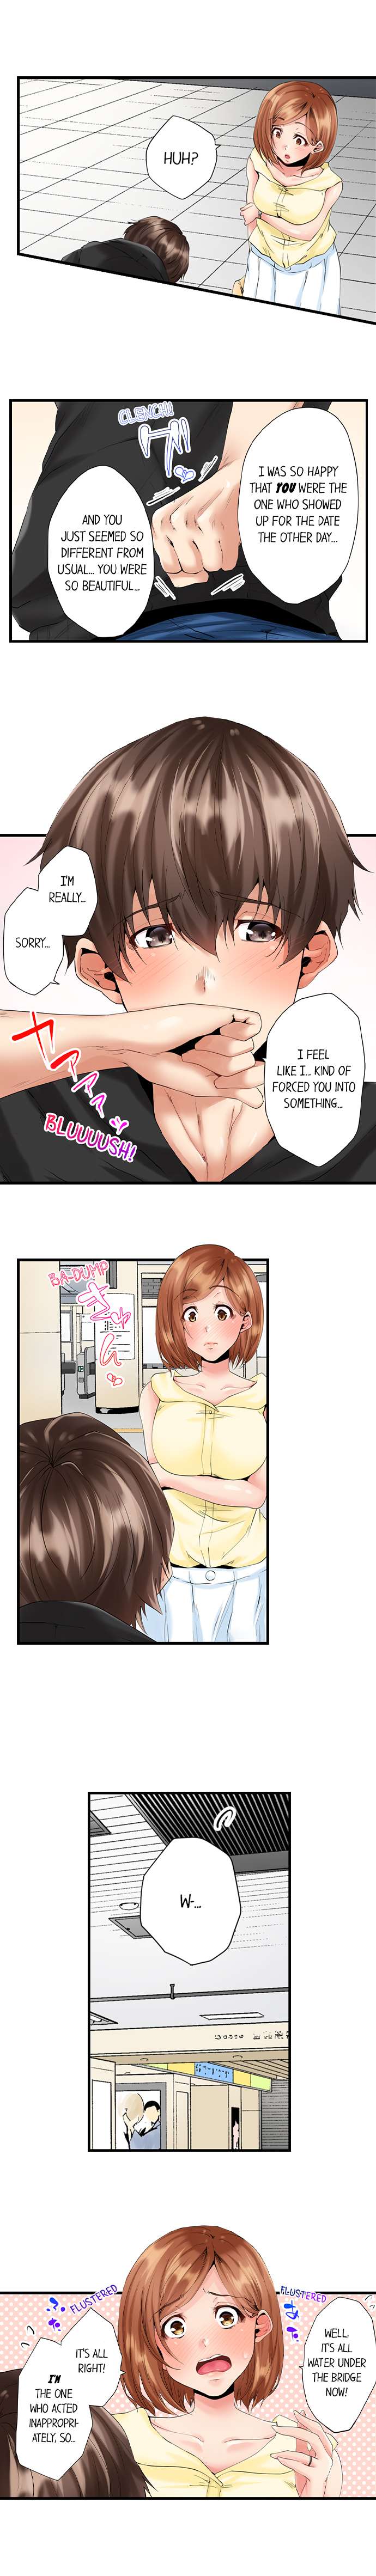 A Rebellious Girl's Sexual Instruction by Her Teacher - Chapter 5 Page 2